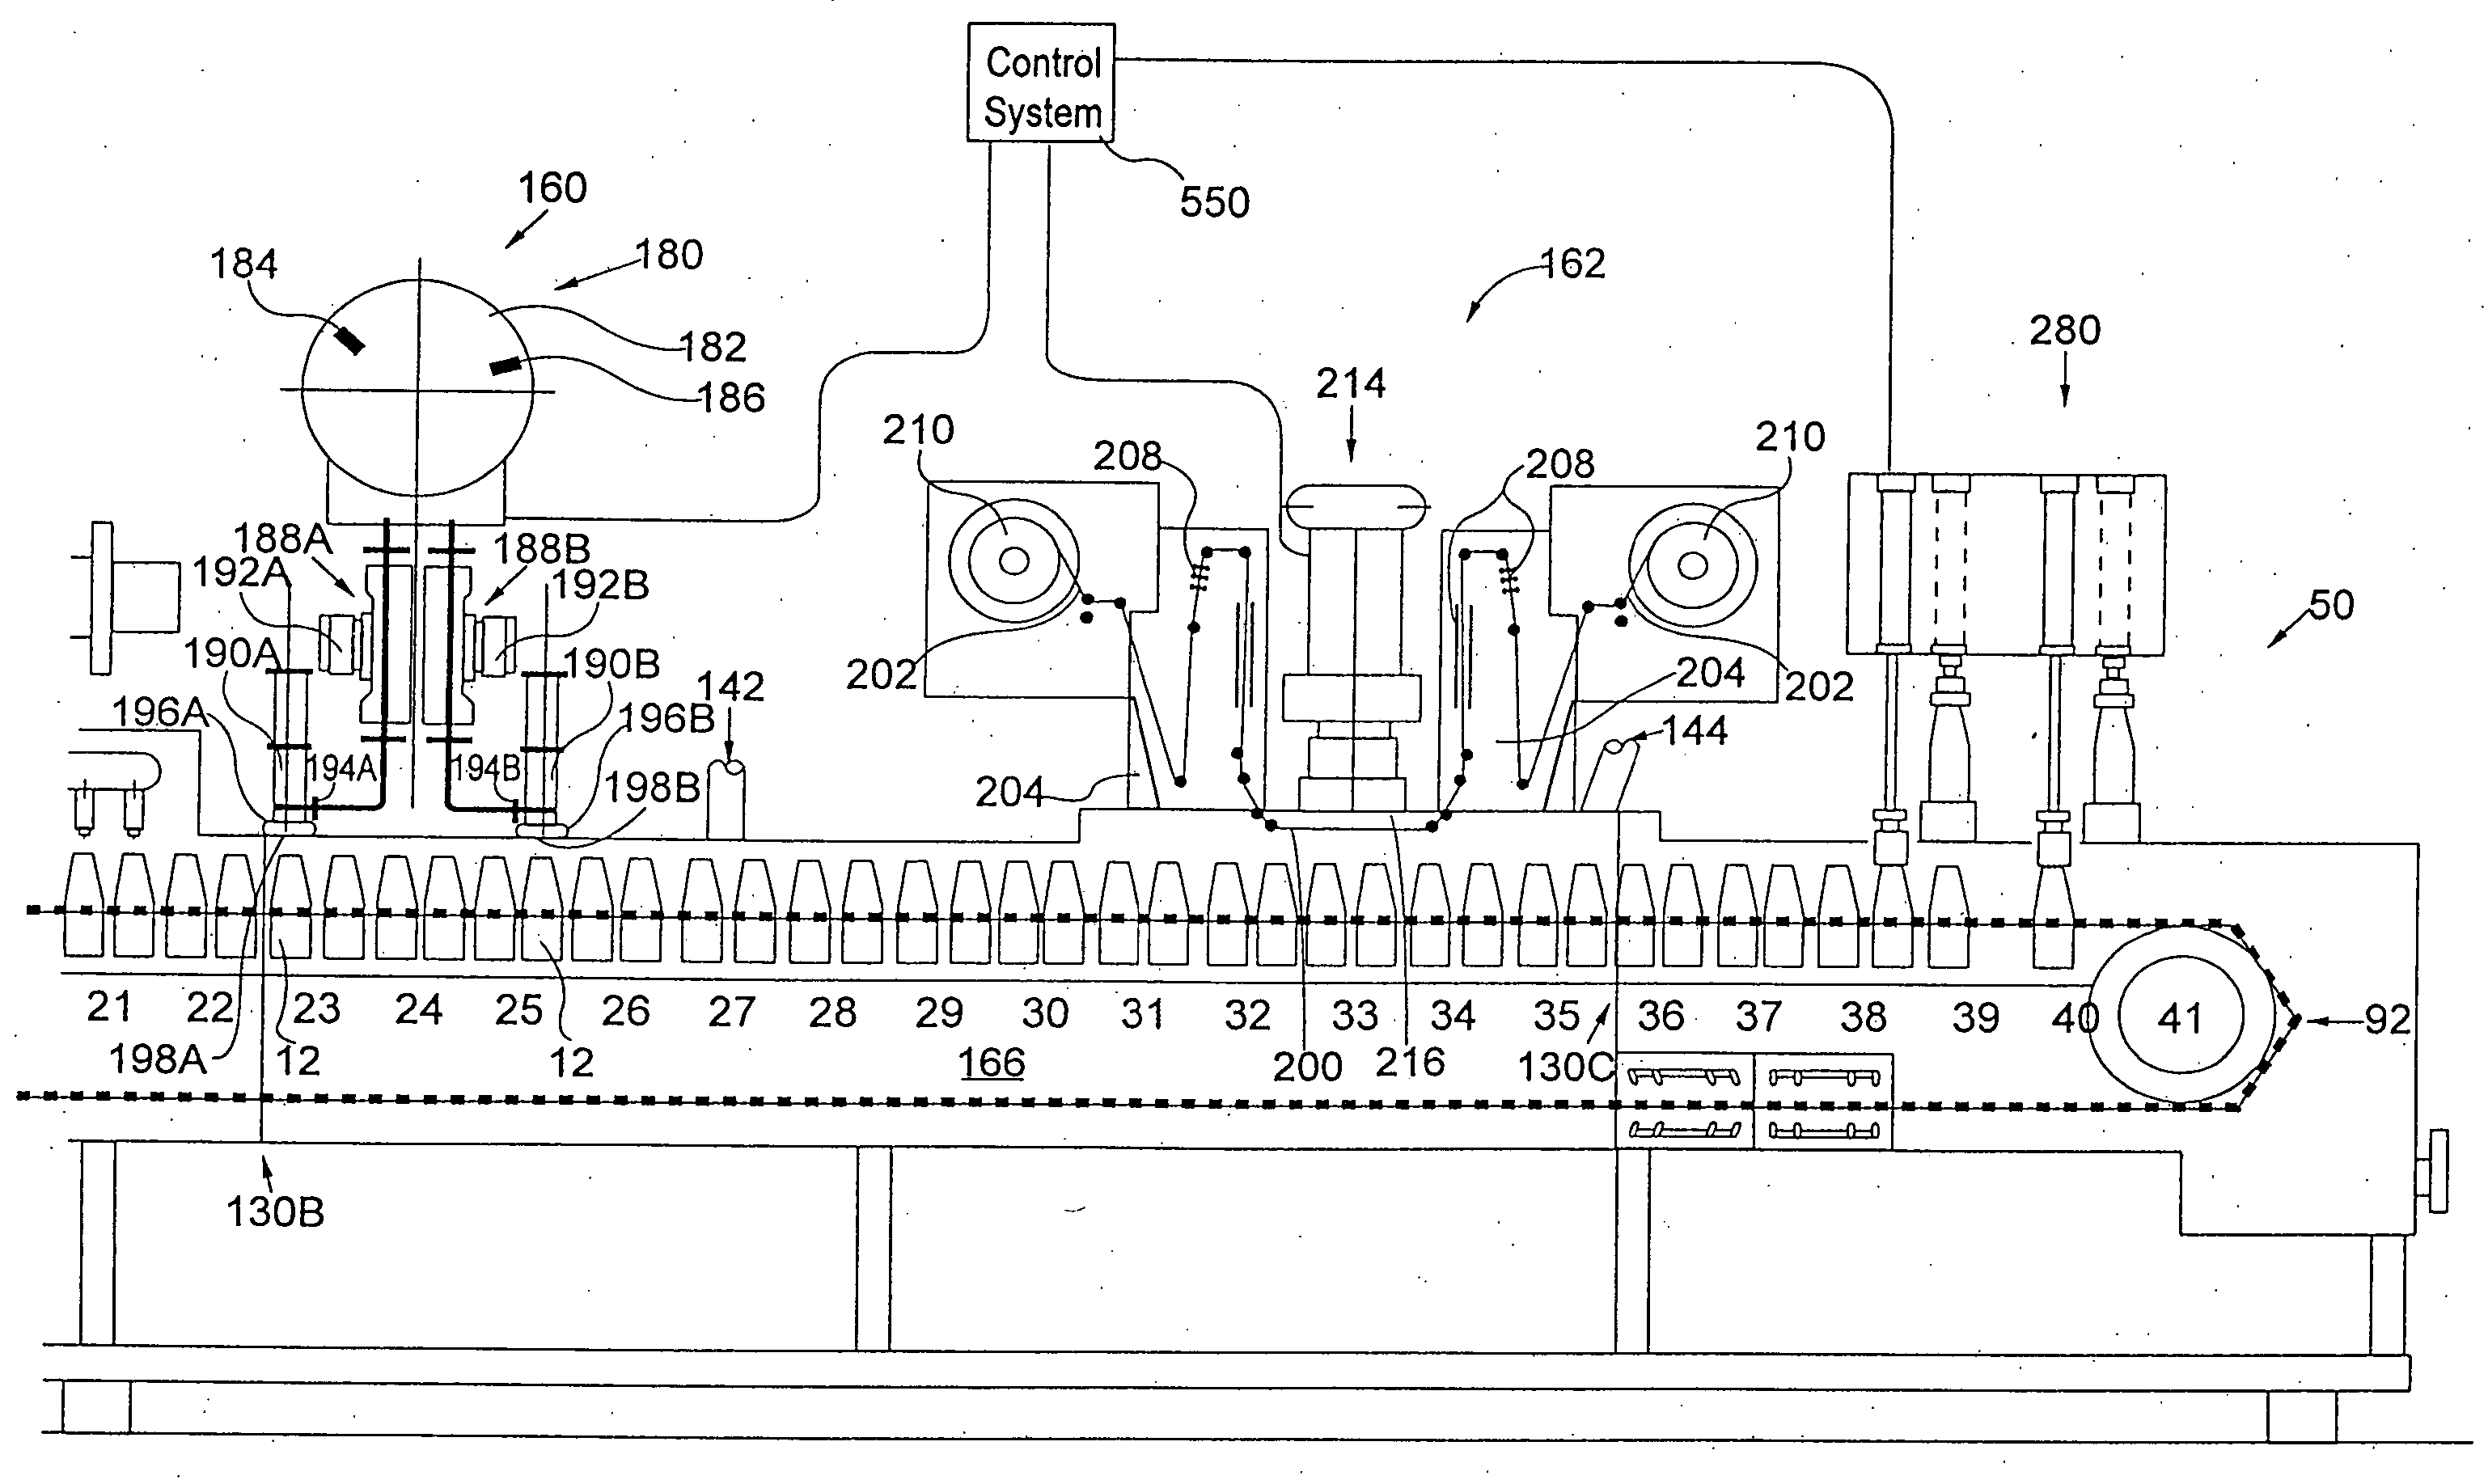 Apparatus for aseptic packaging